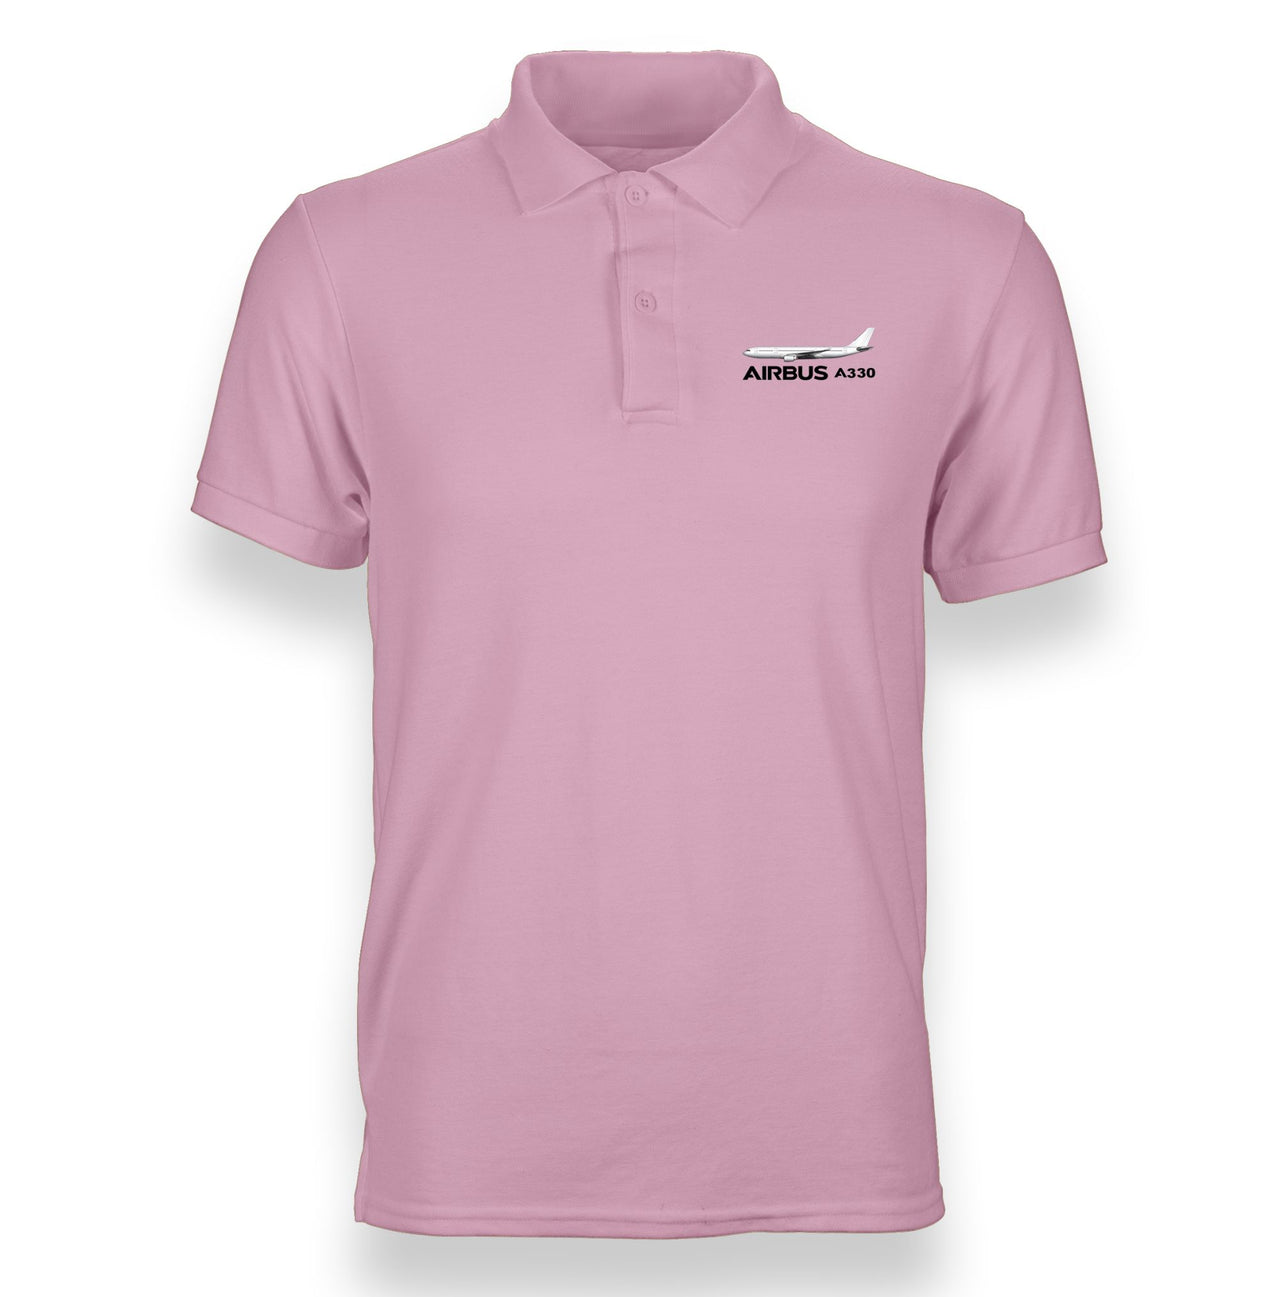 The Airbus A330 Designed "WOMEN" Polo T-Shirts